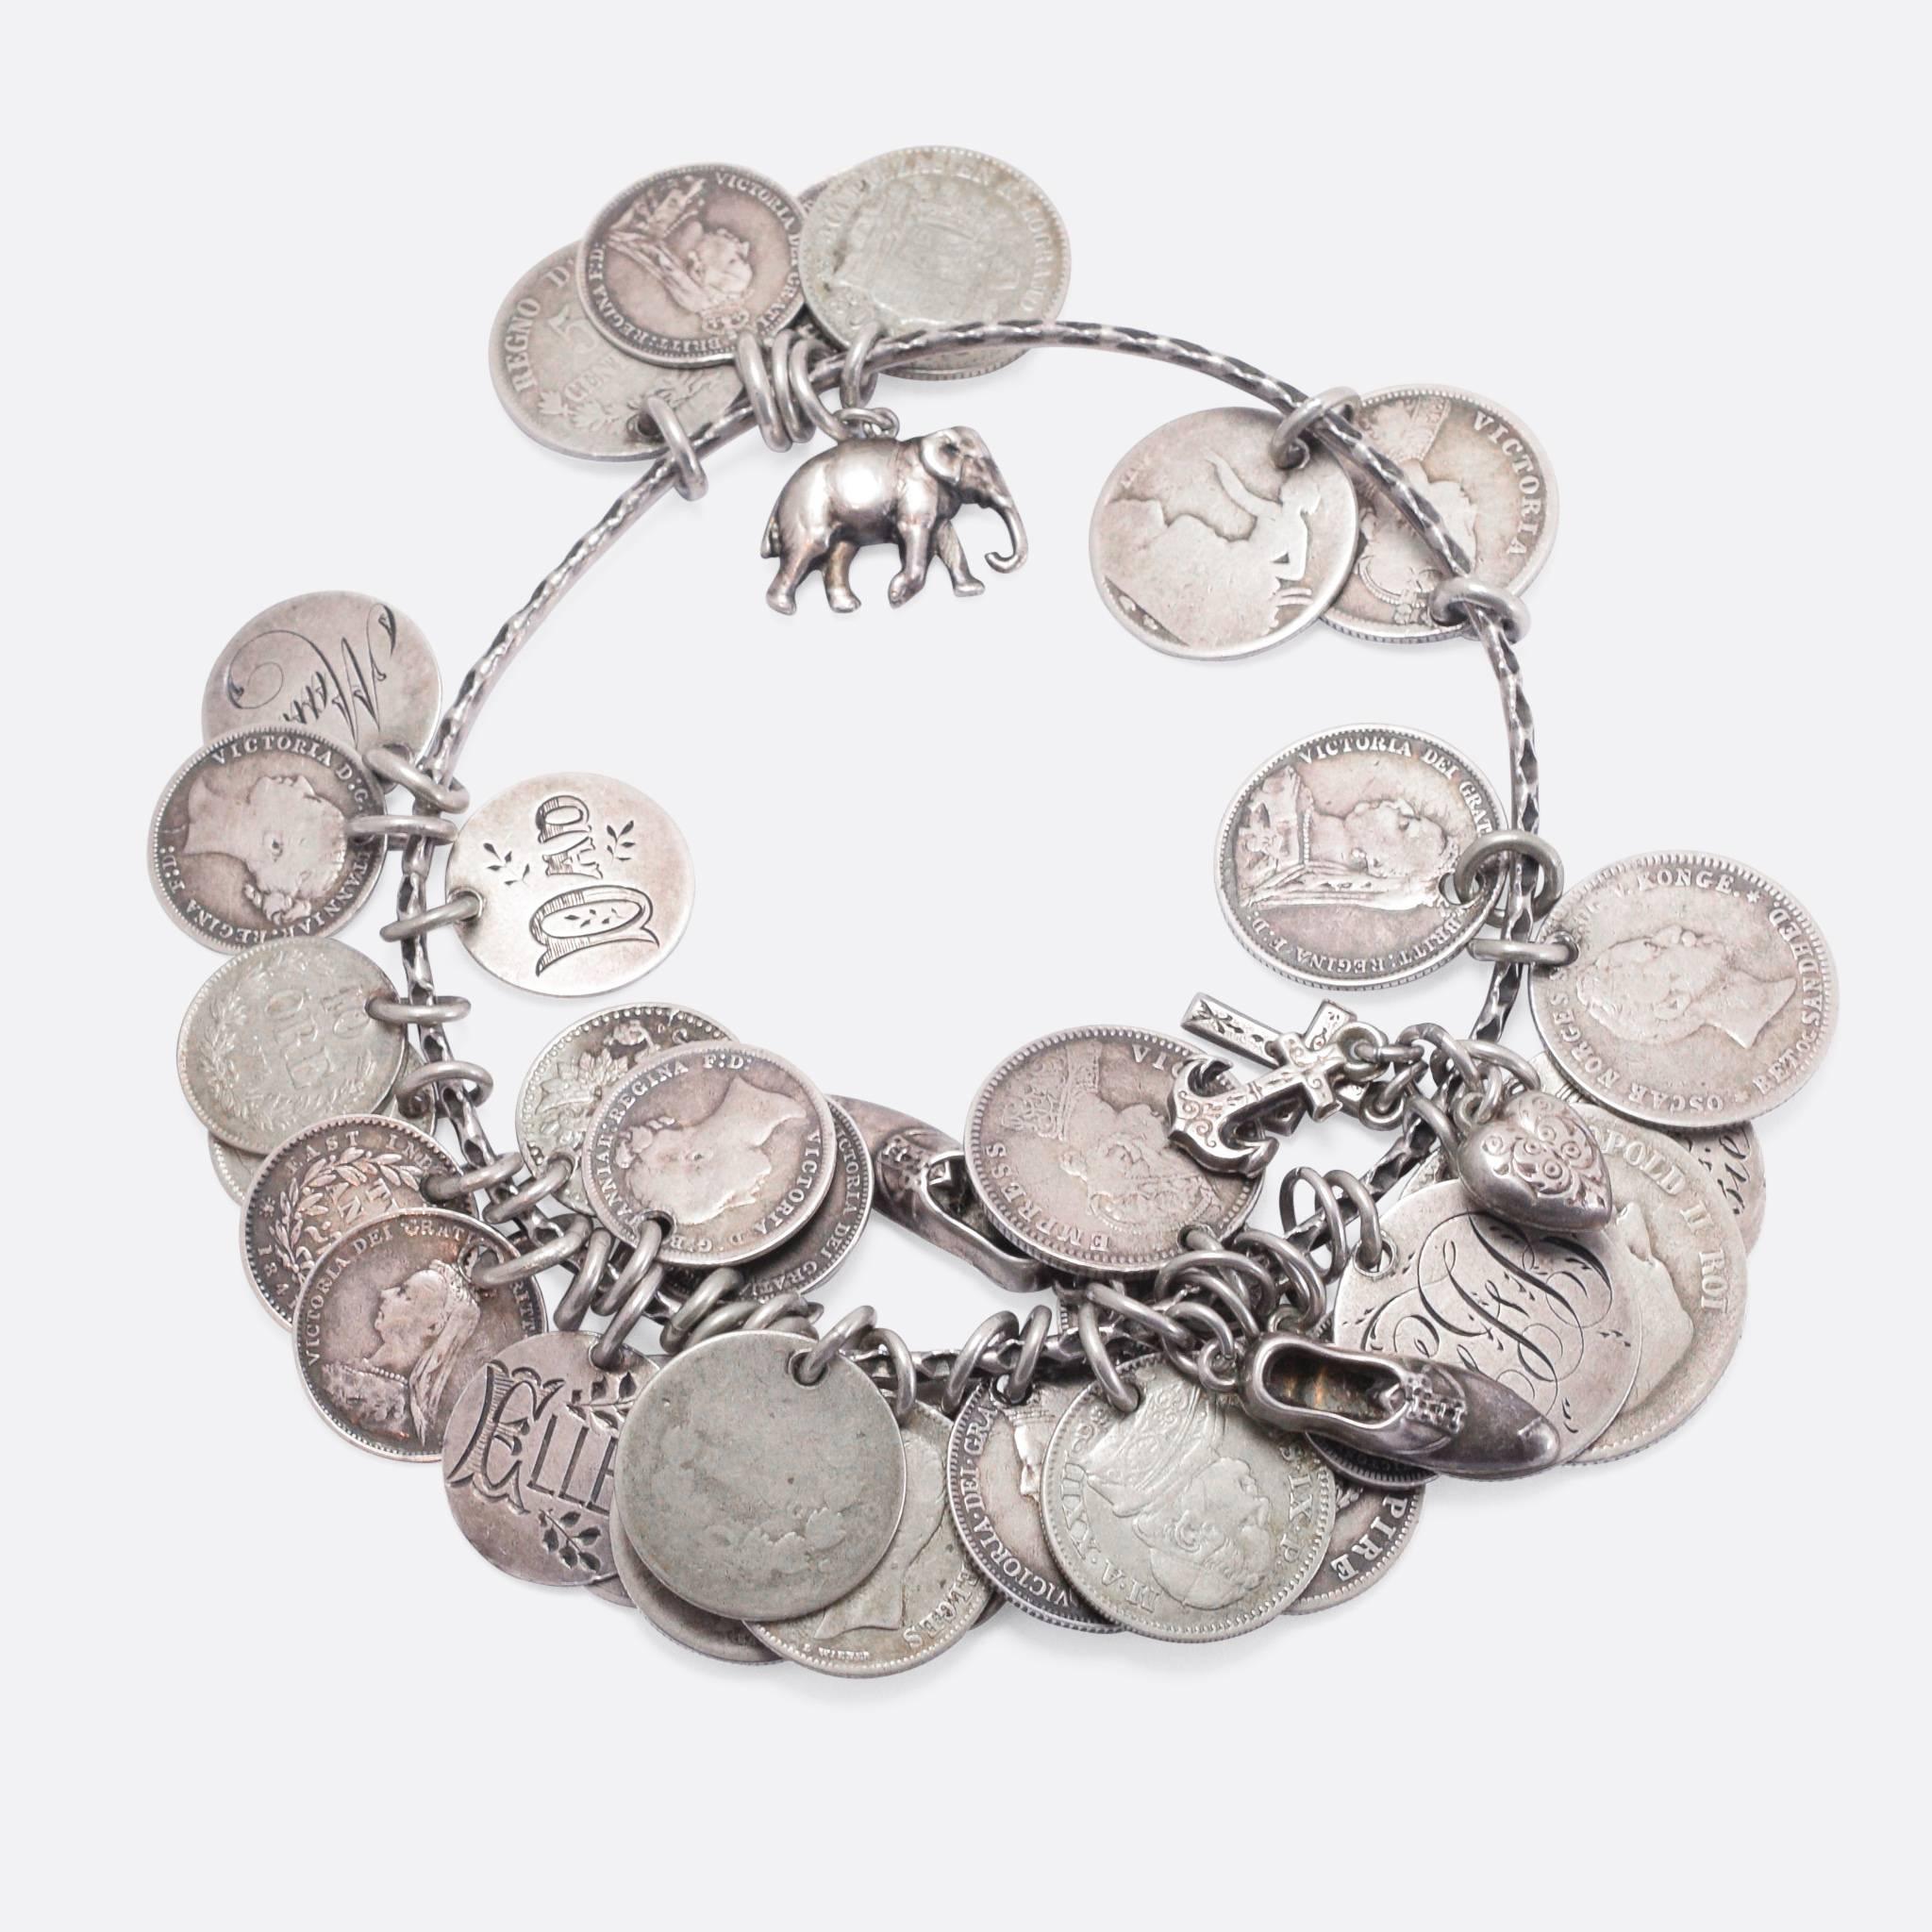 An original late Victorian Love Token bangle, set with a selection of charms and coins. Many of the coins have been filed down on one side, and then engraved with a name (or sometimes an image such as the piano pictured) - they are mainly 